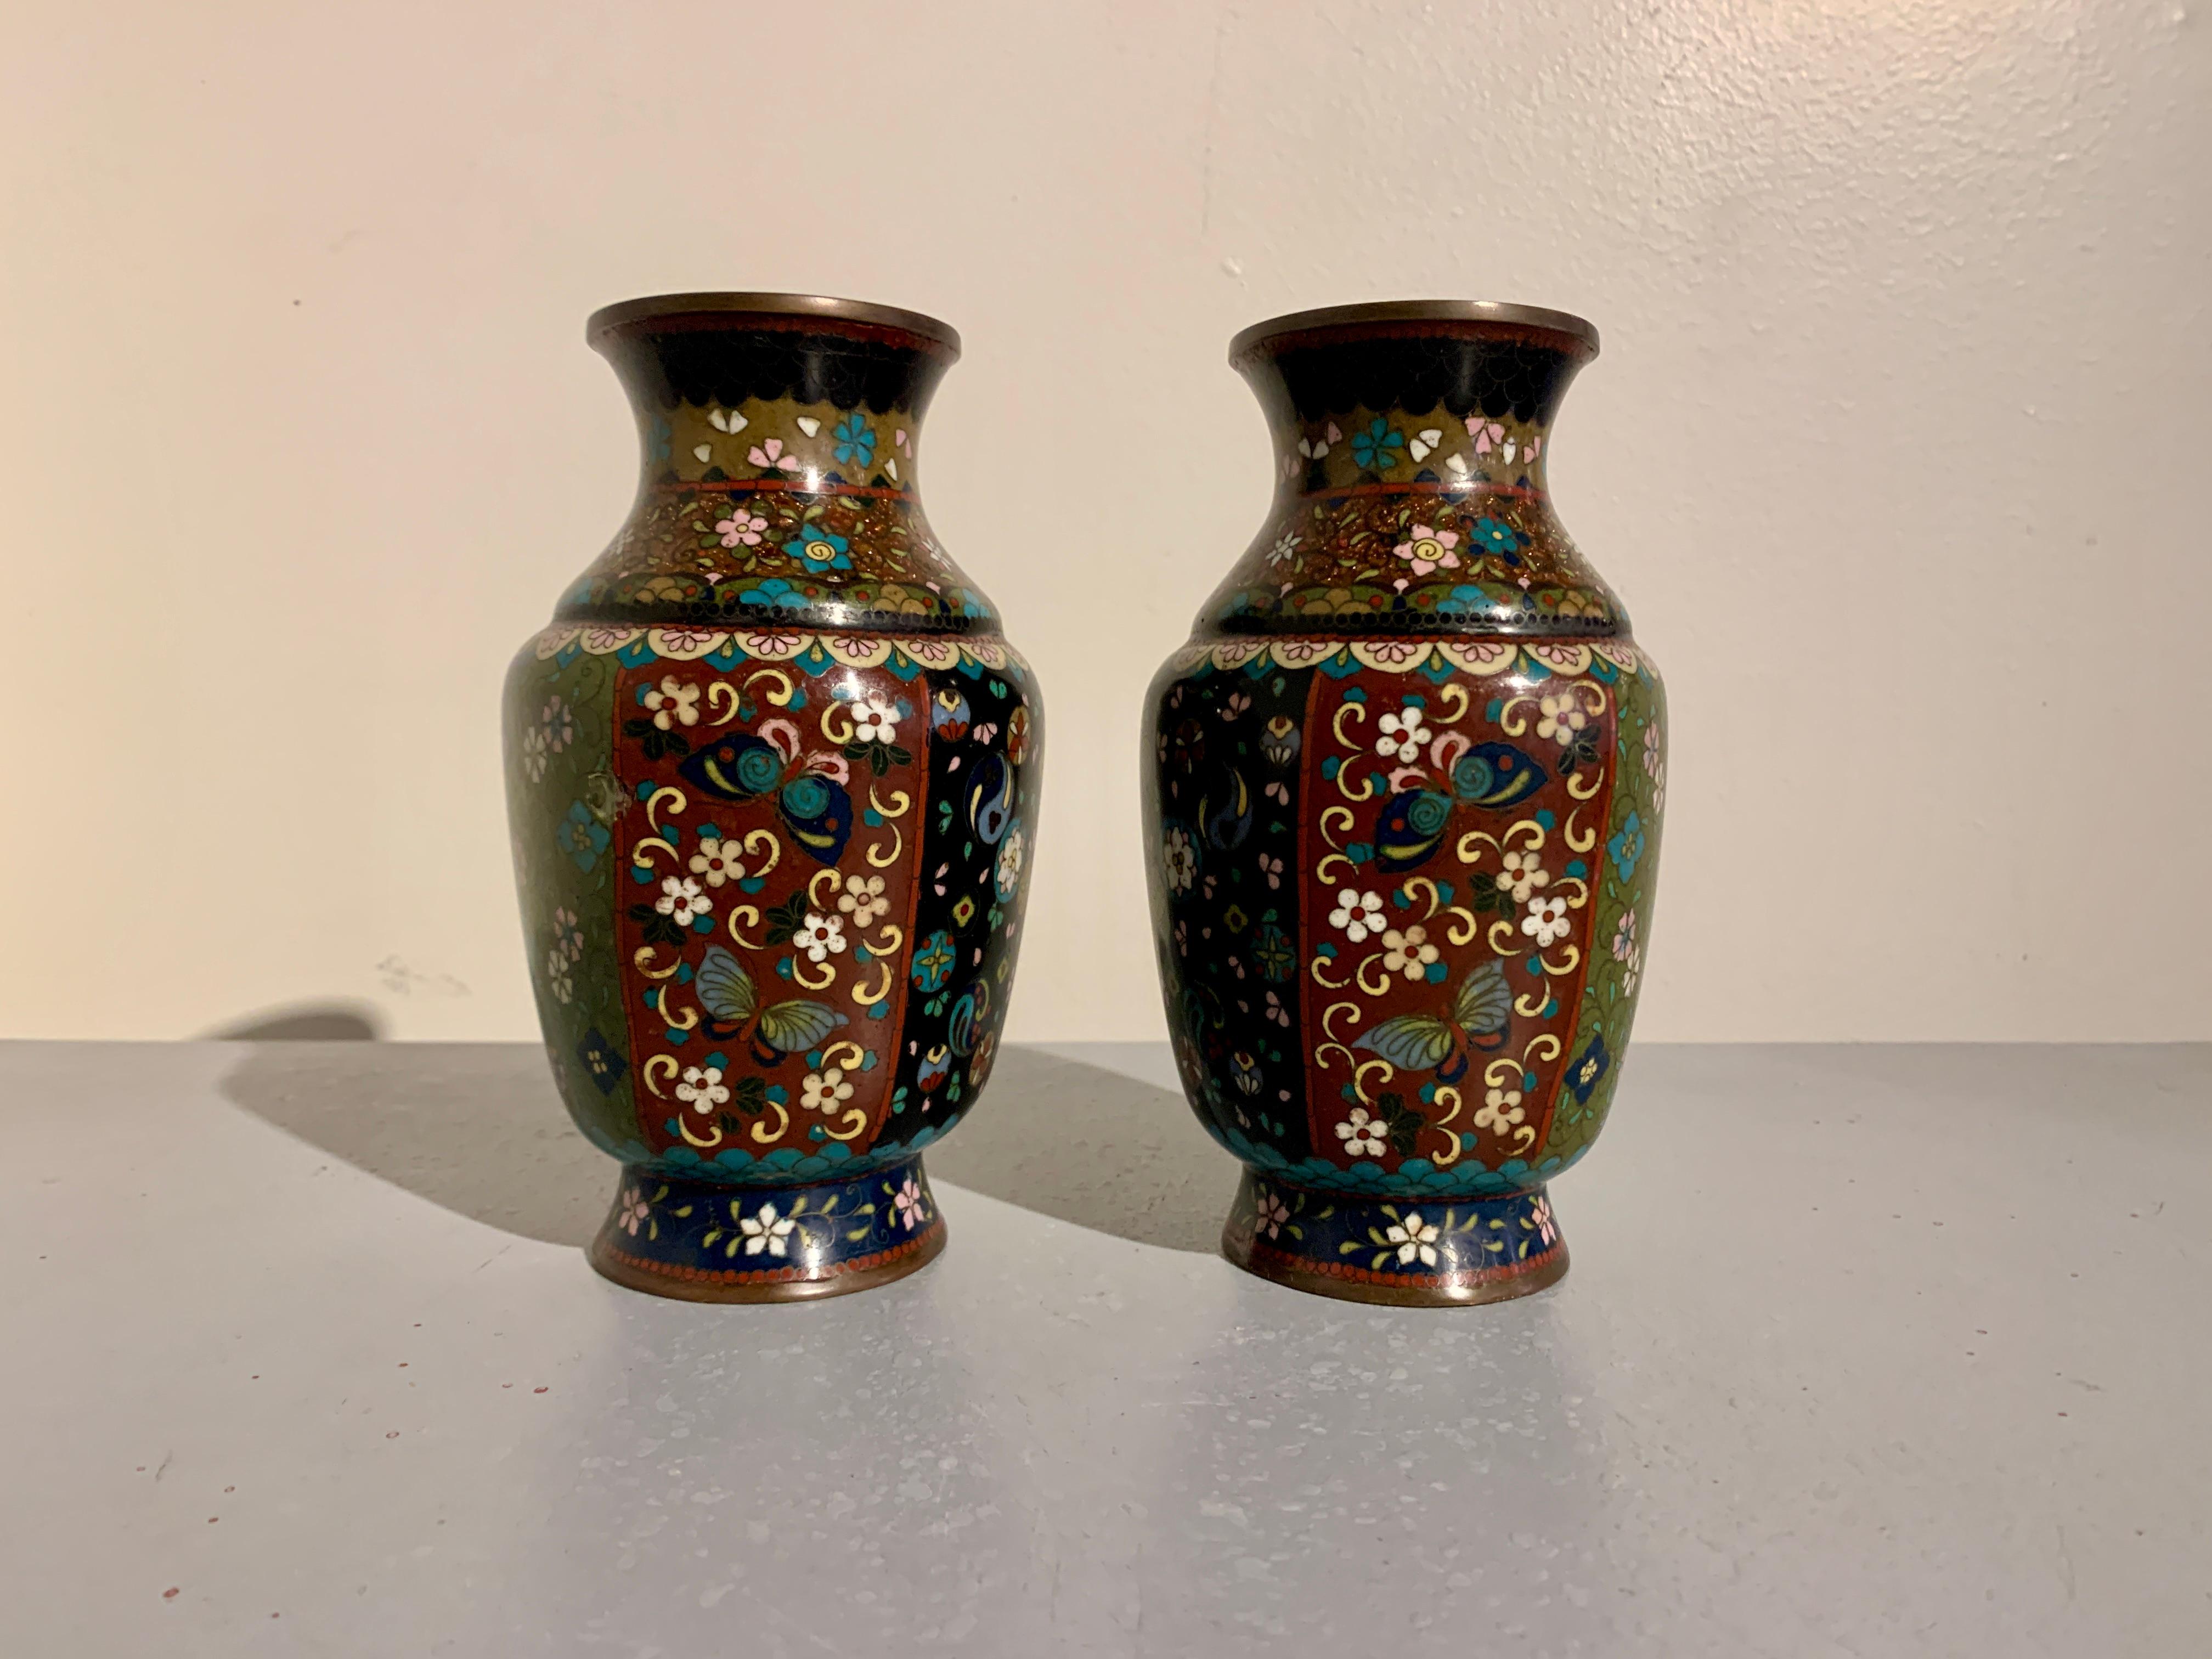 A delightful pair of Japanese cloisonne and goldstone faceted vases, Meiji period, late 19th century, Japan.

The vases each with a faceted body, tapered shoulders, short neck and everted mouth, all set on a slightly splayed foot. 

The faceted